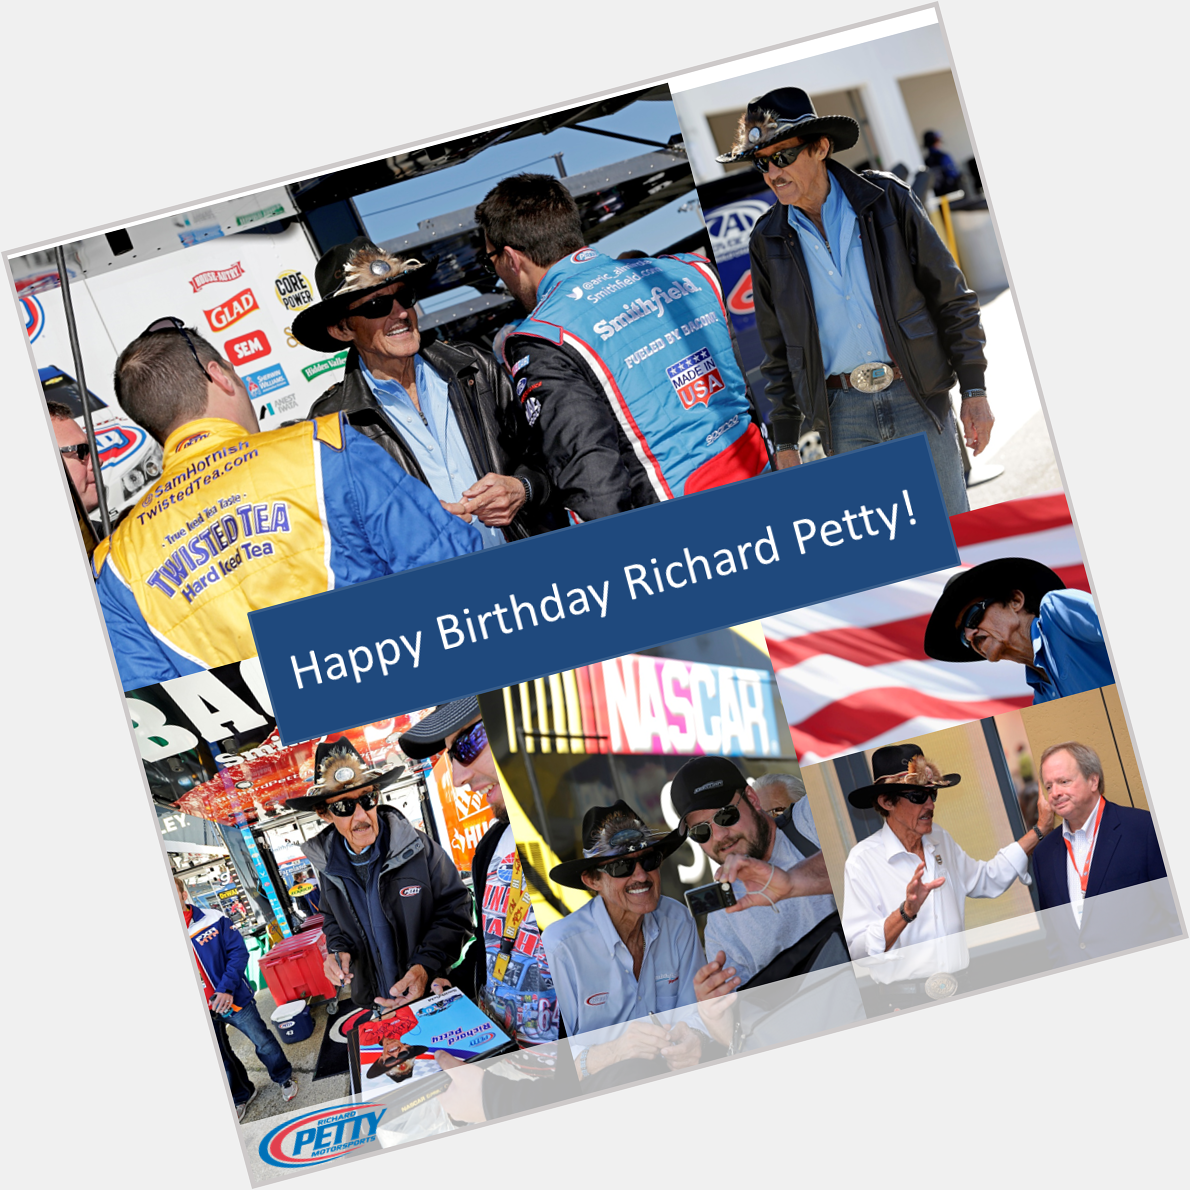 How cool that Richard Petty & share a birthday!?! Happy Birthday to & his driver! 